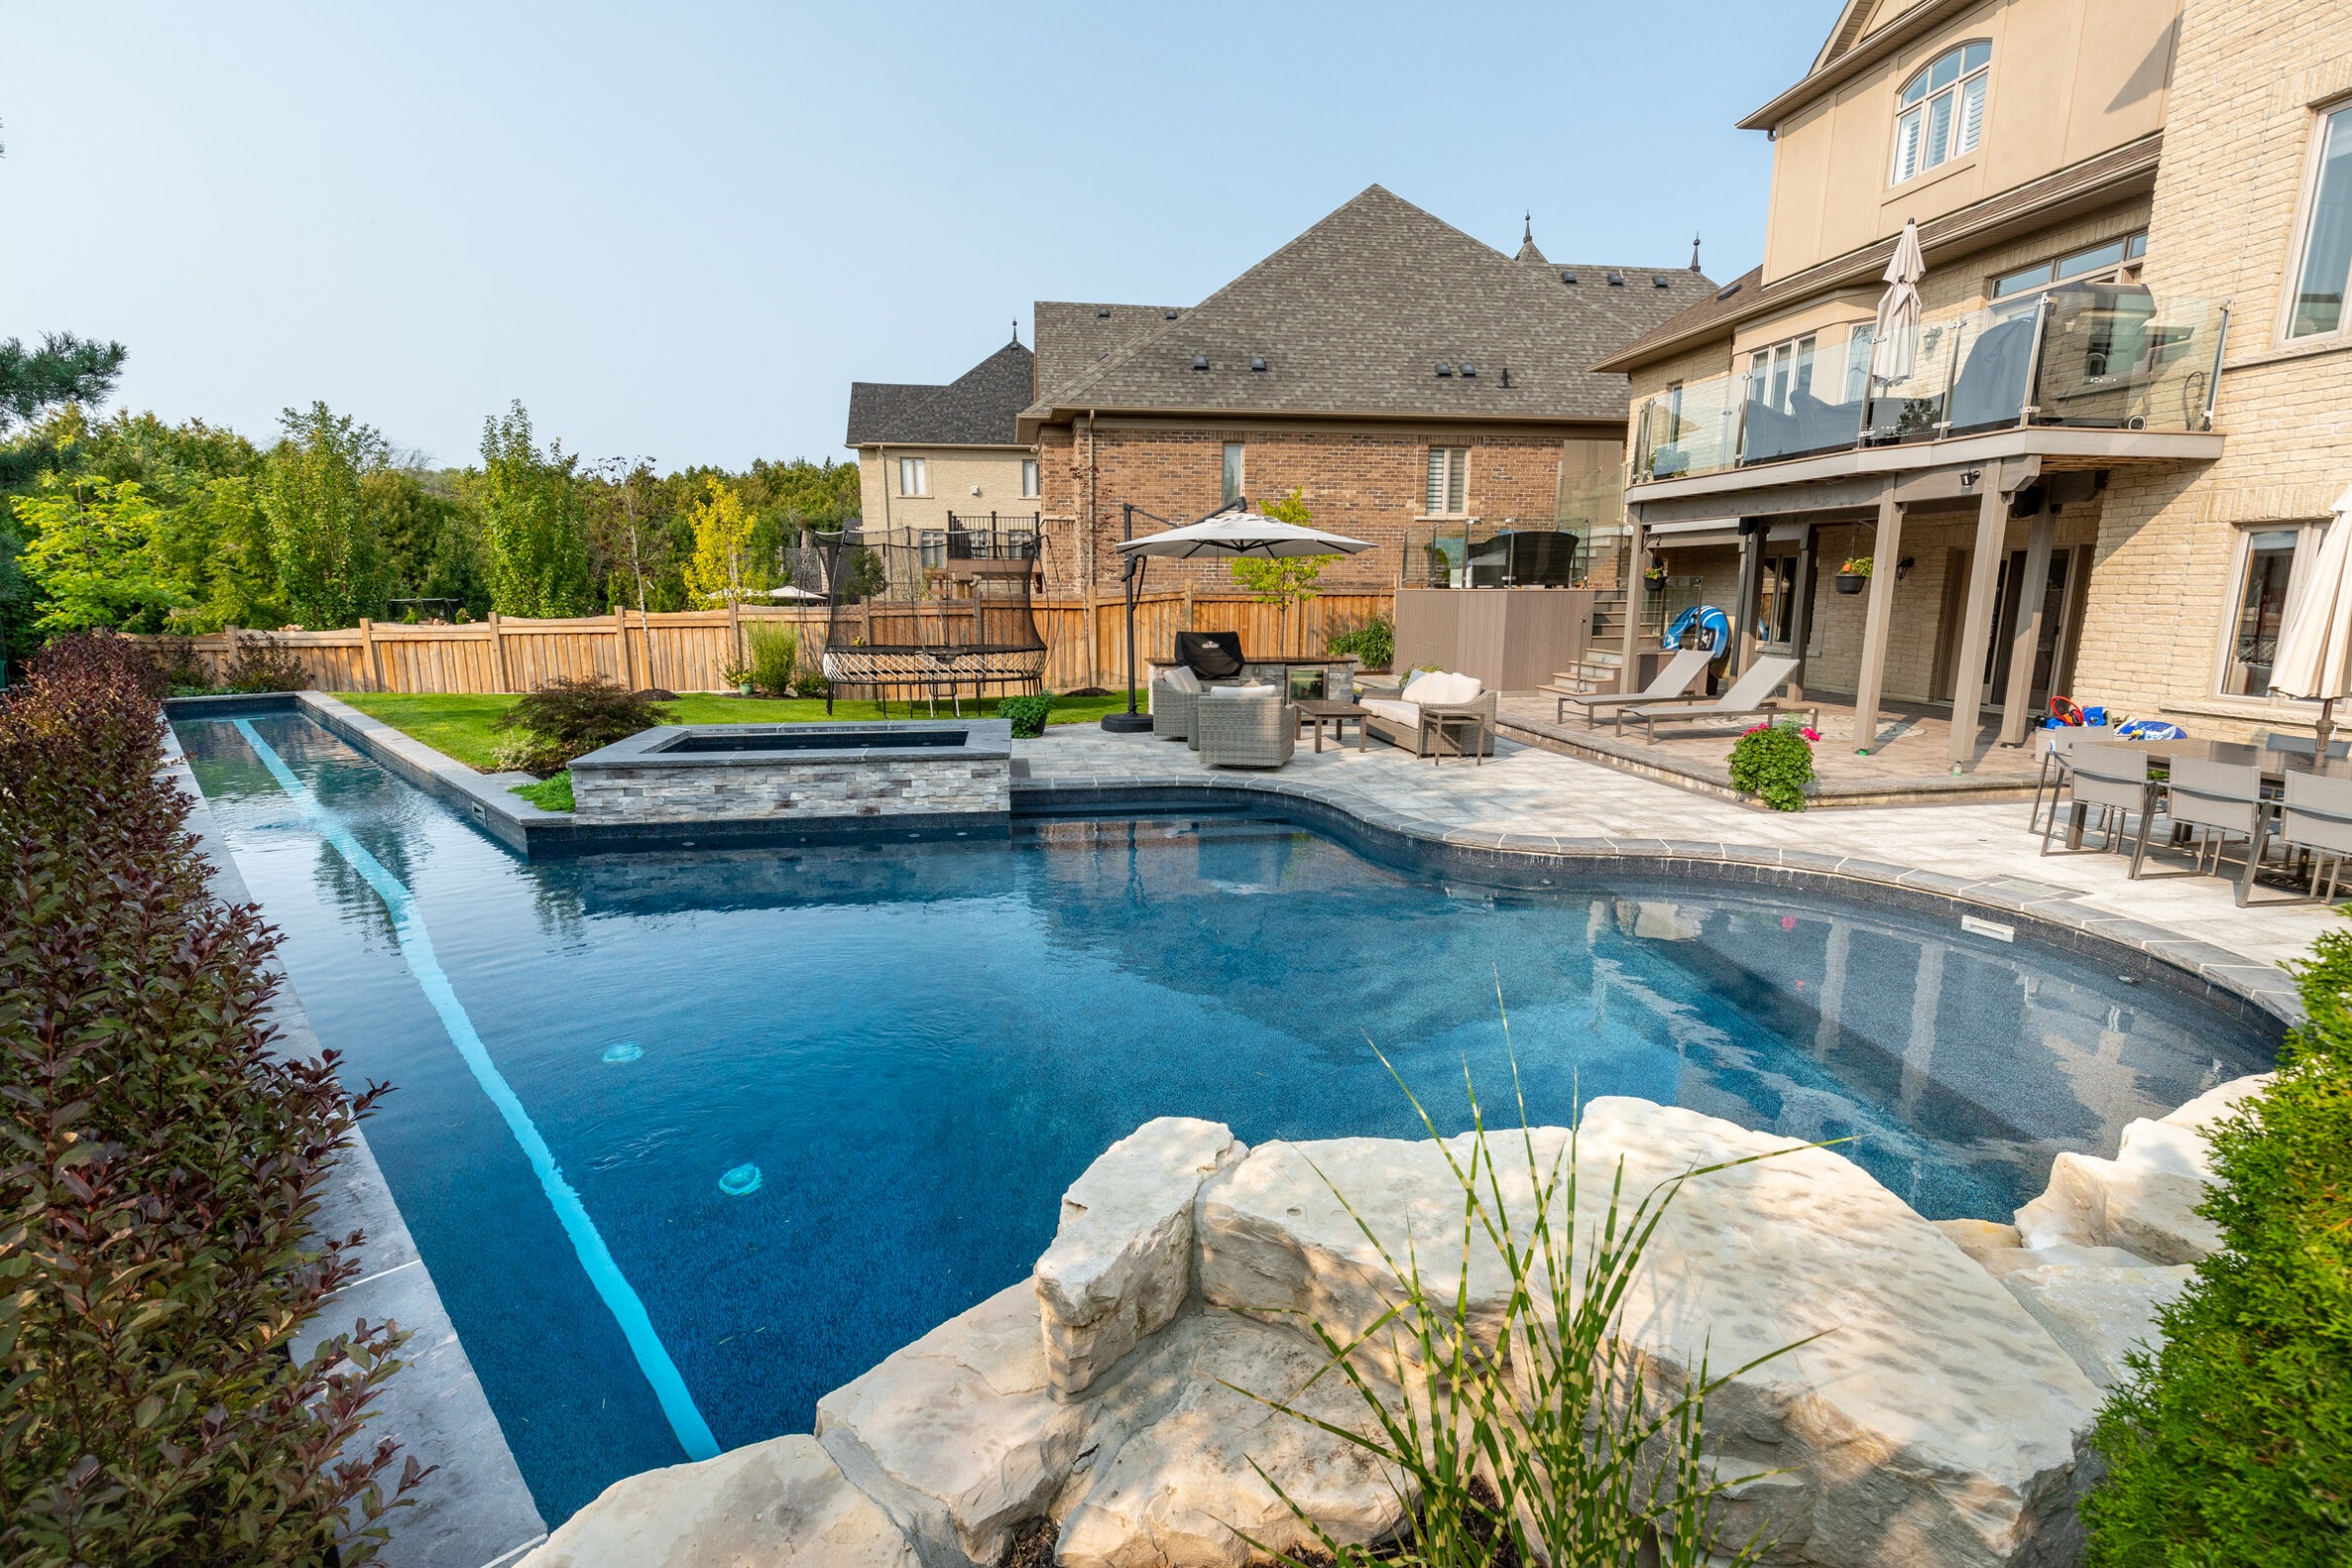 An upscale backyard featuring a large swimming pool, patio furniture, lush landscaping, and a two-story house with a balcony and outdoor grill.